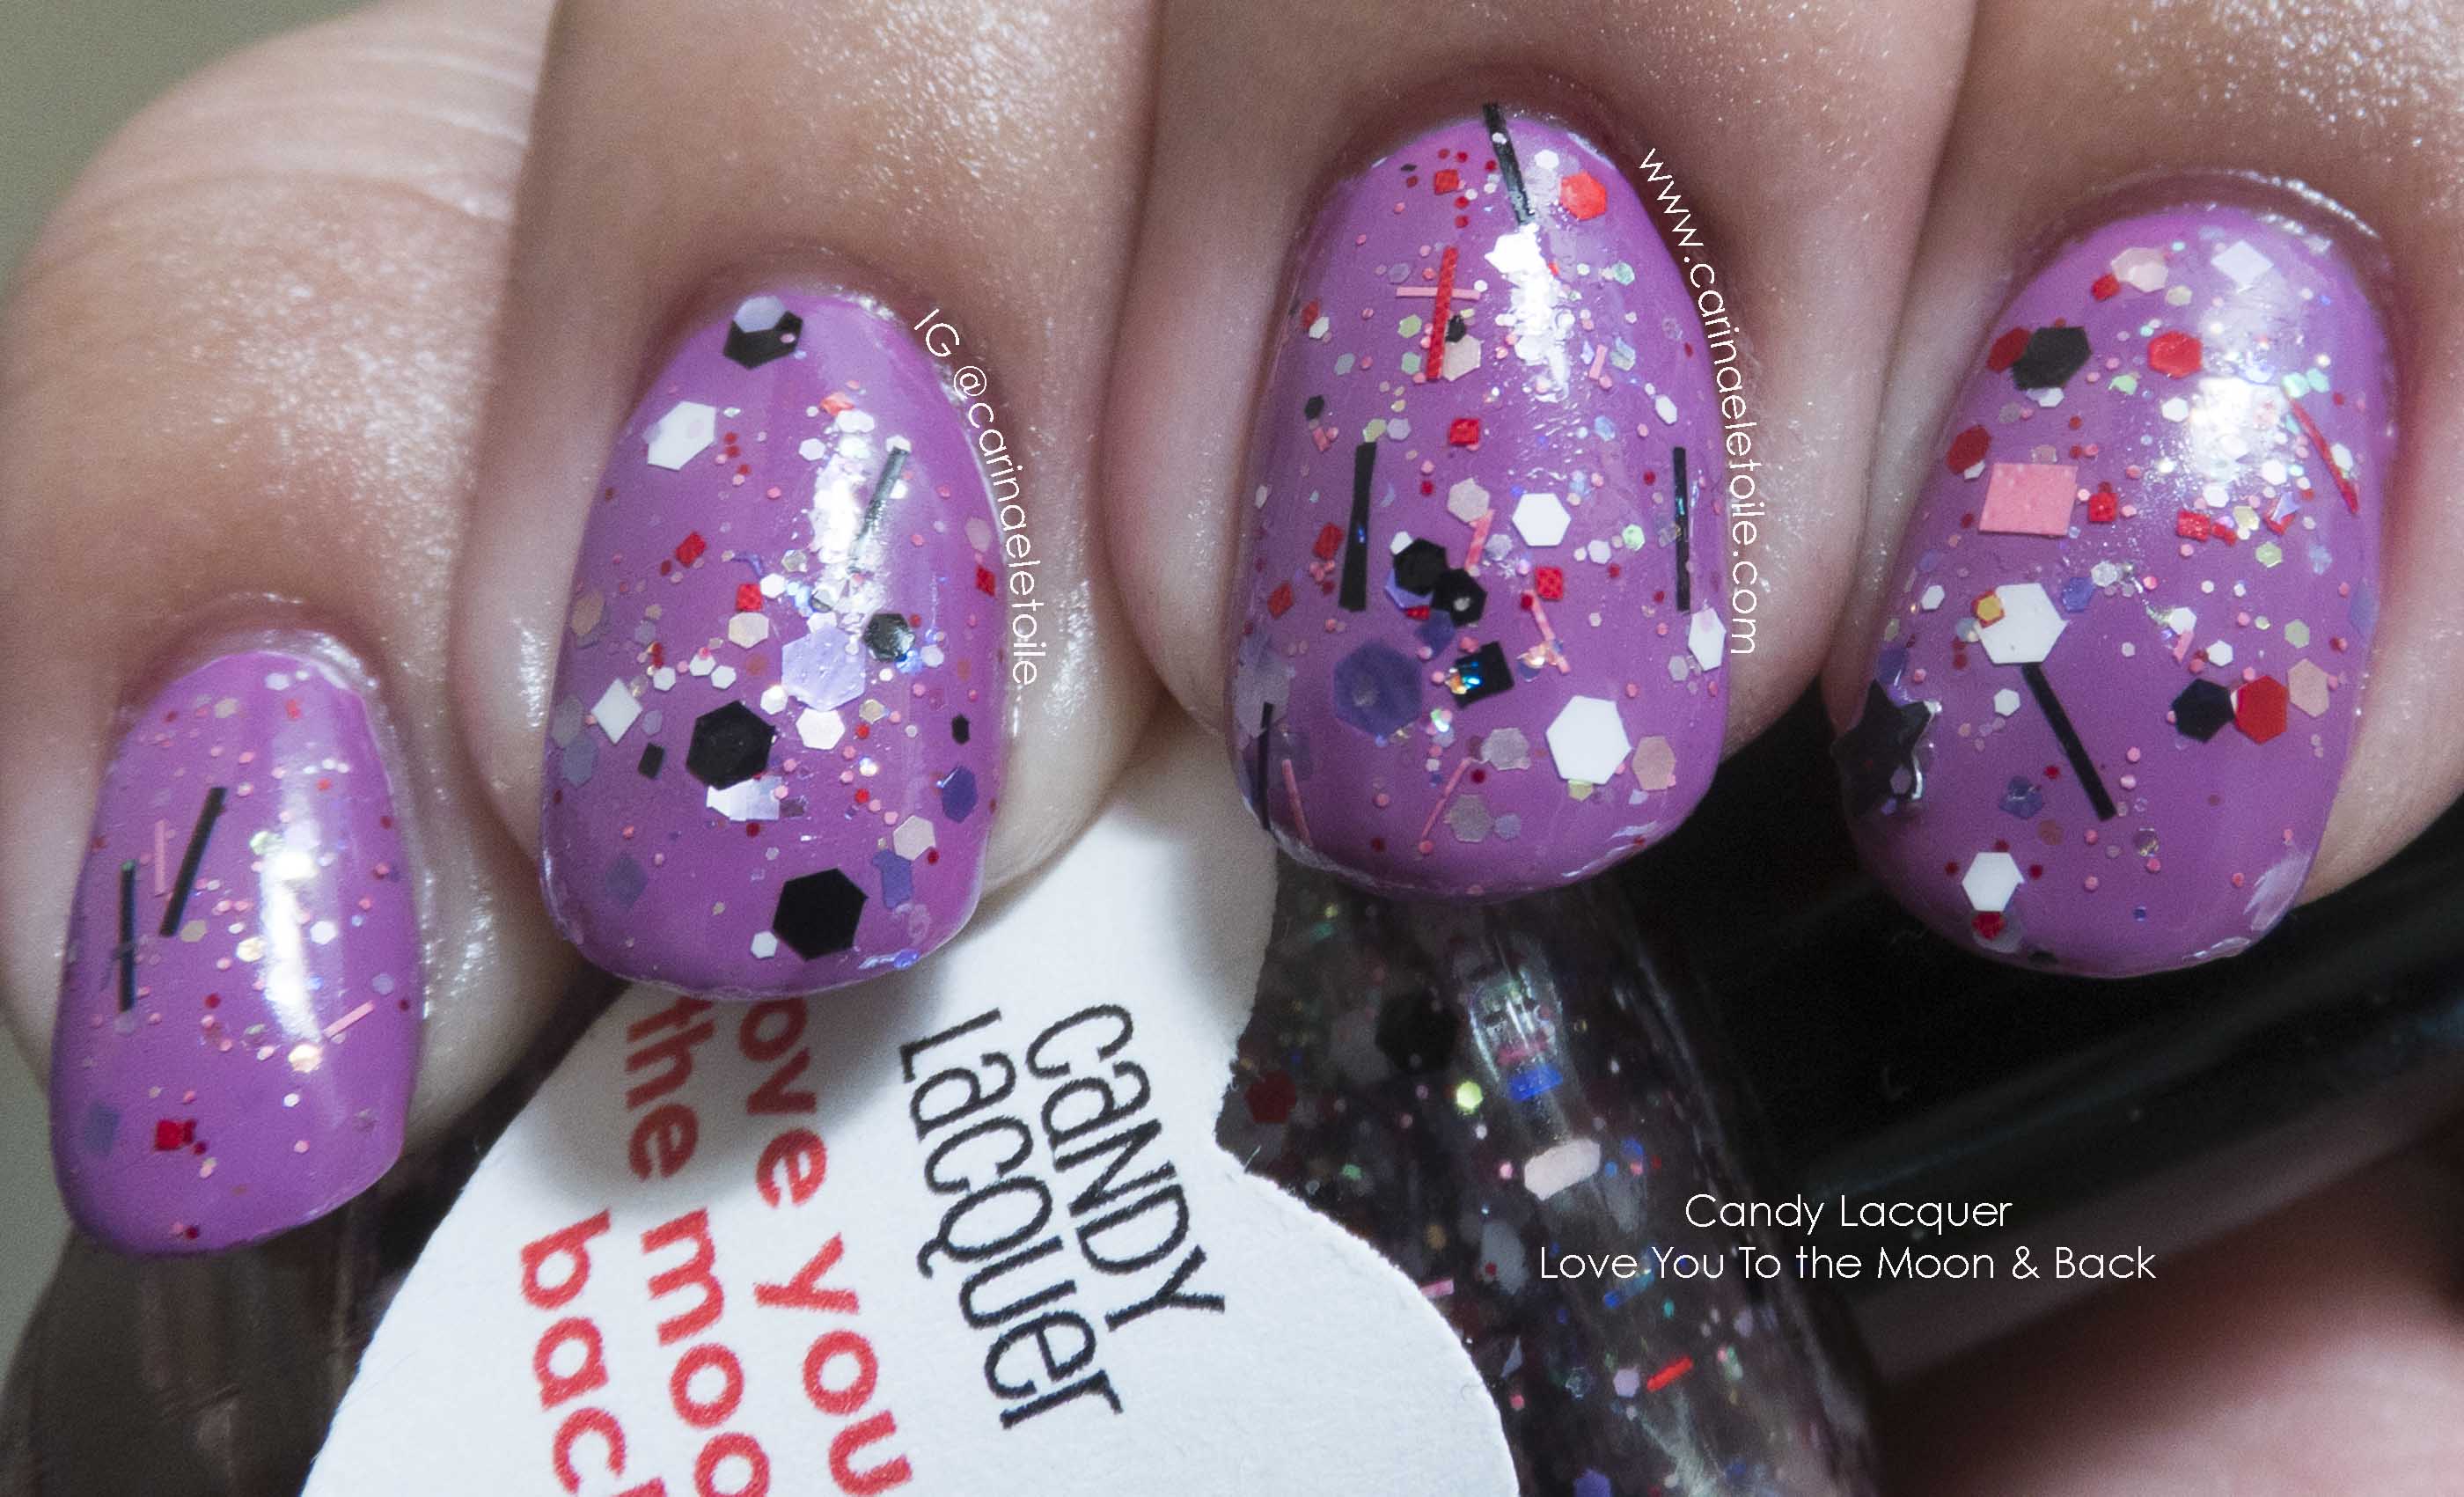 Candy Lacquer Love You To the Moon & Back